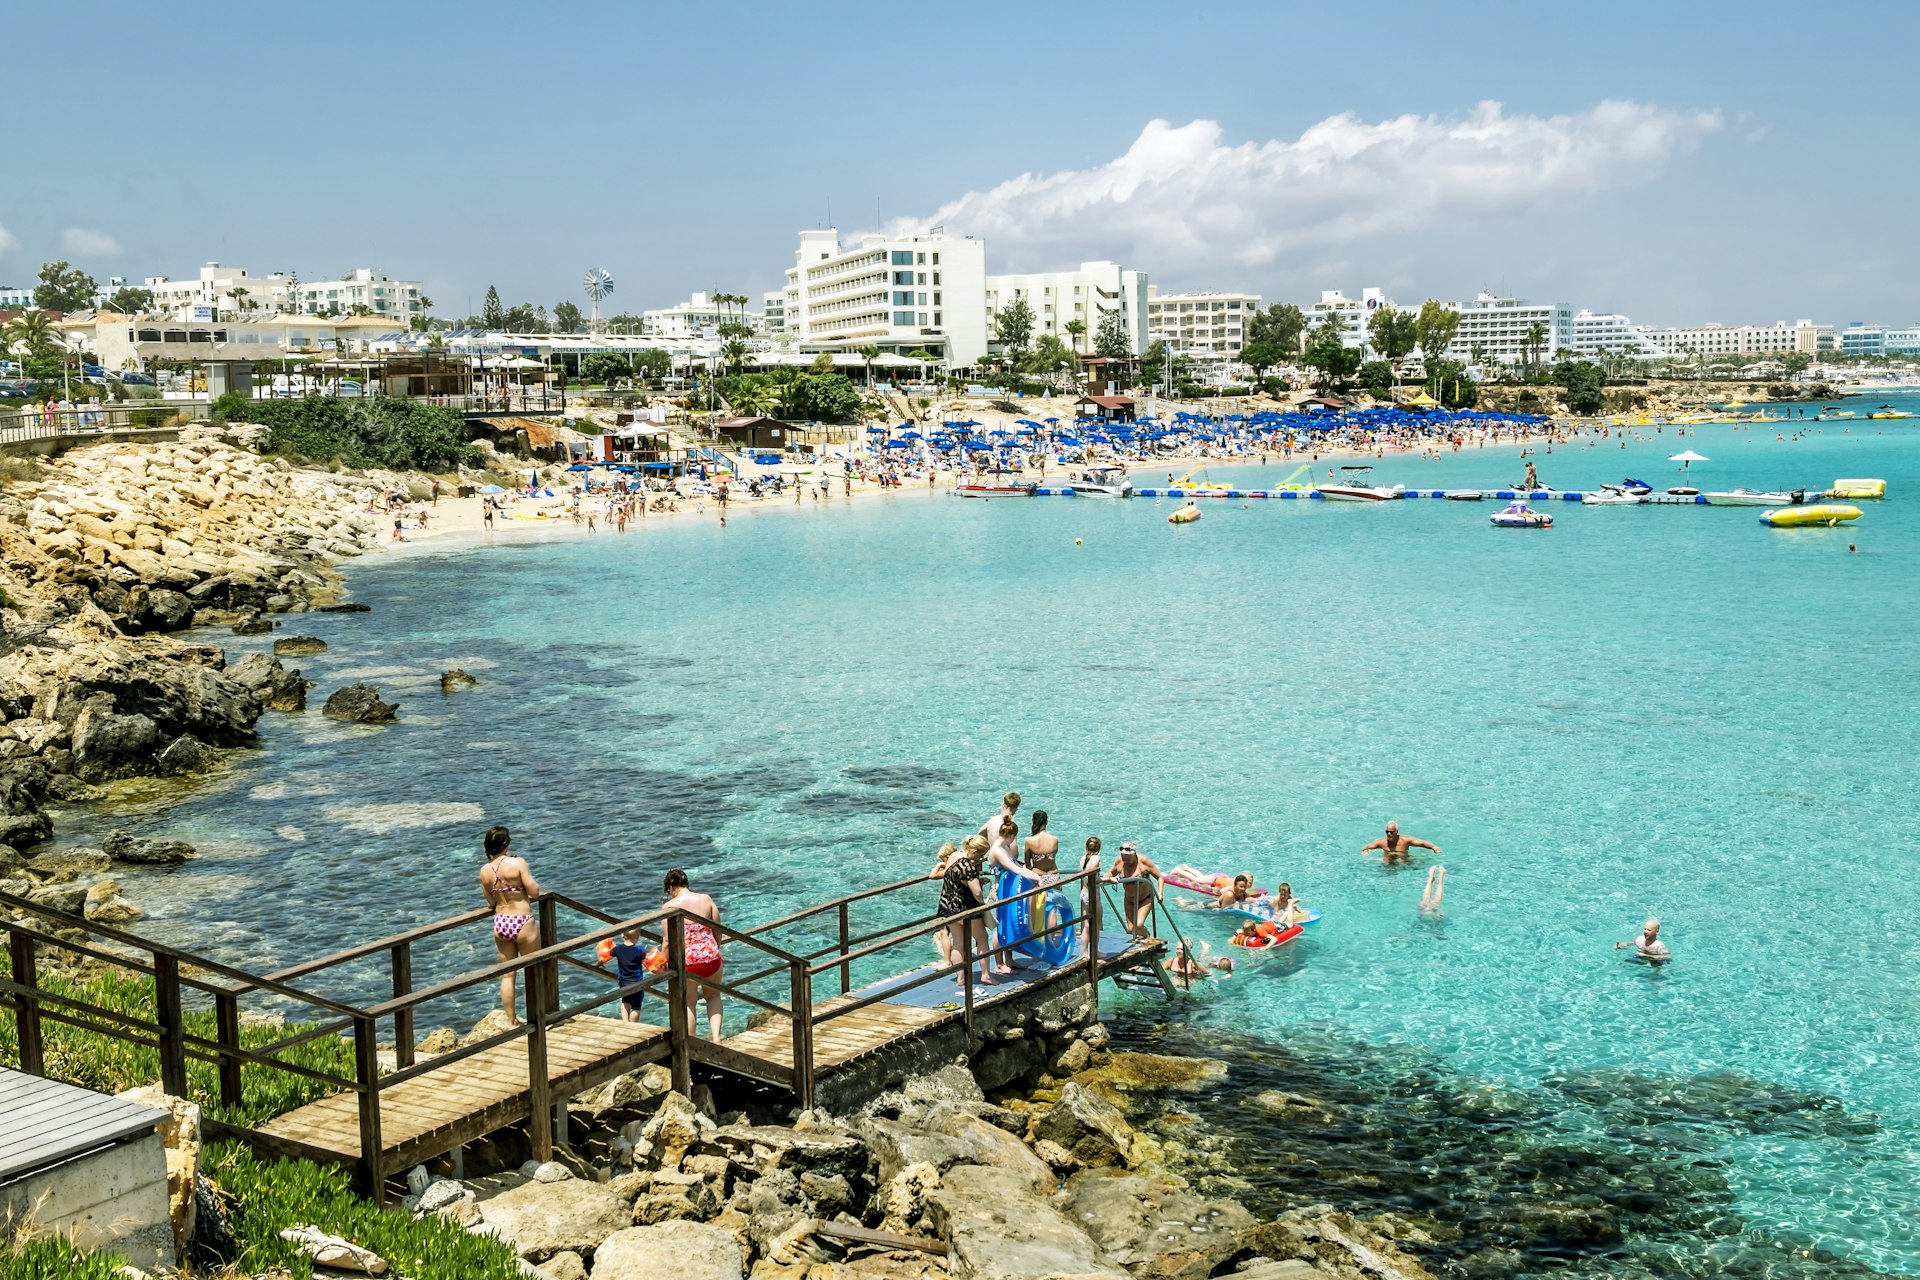 Hotels and beach at Fig tree Bay in Protaras, Cyprus